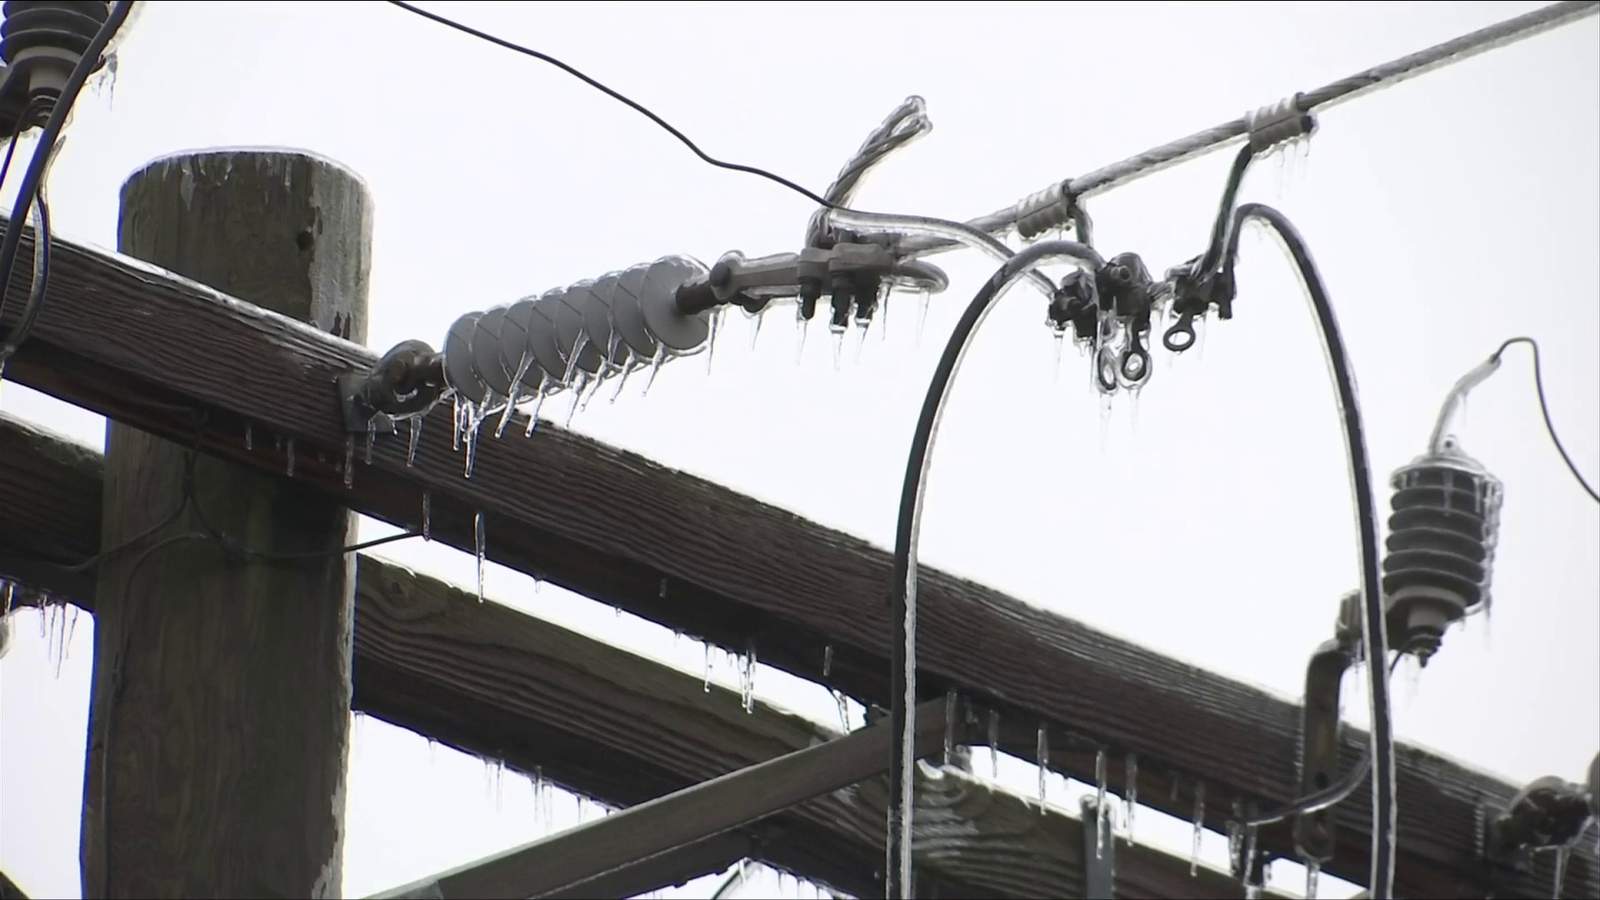 Ice storm knocks out power for thousands in Danville